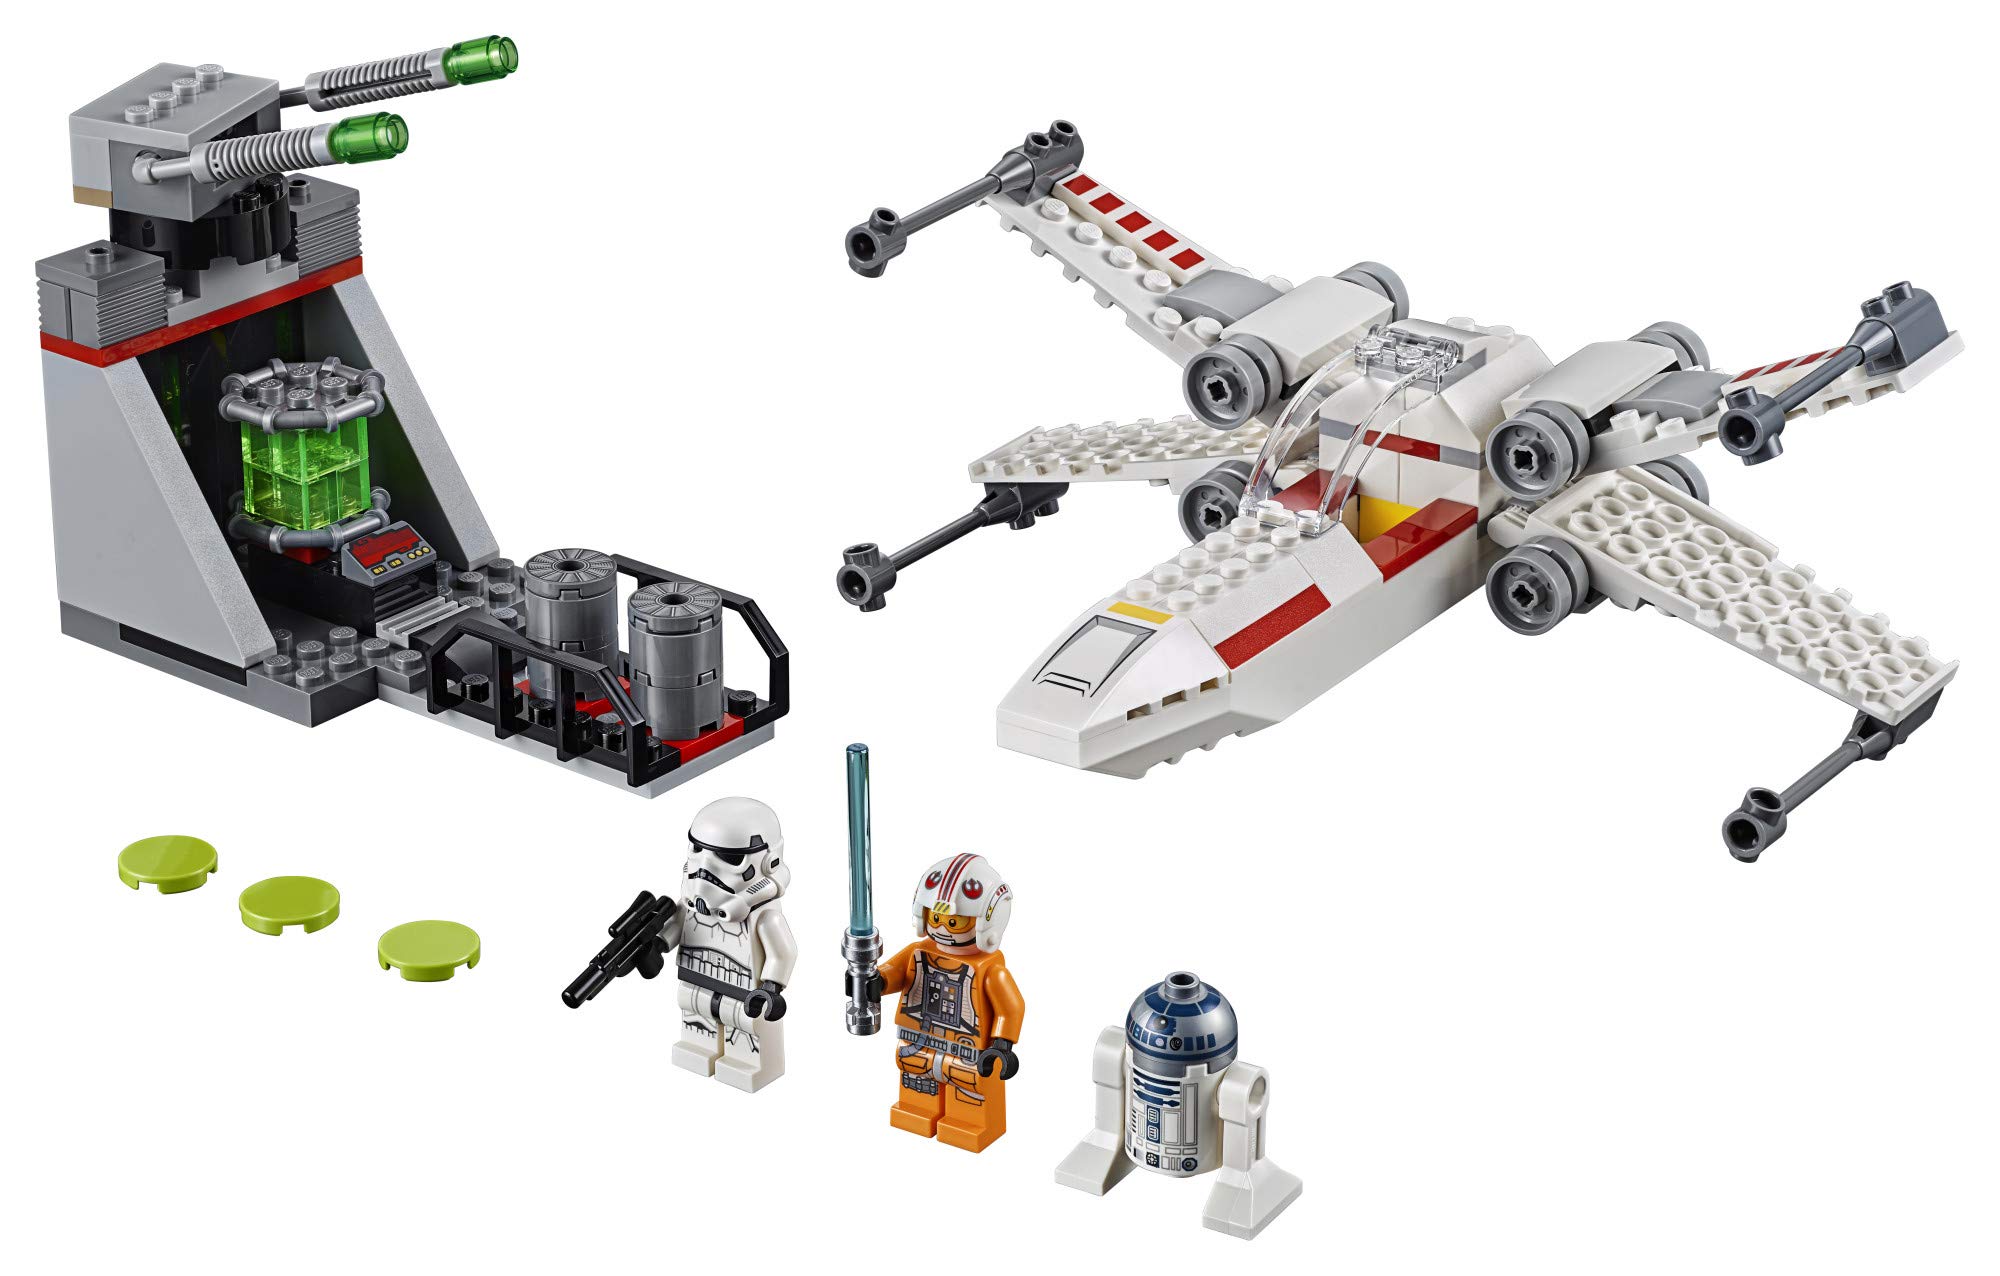 LEGO Star Wars X Wing Starfighter Trench Run 75235 4+ Building Kit (132 Pieces)